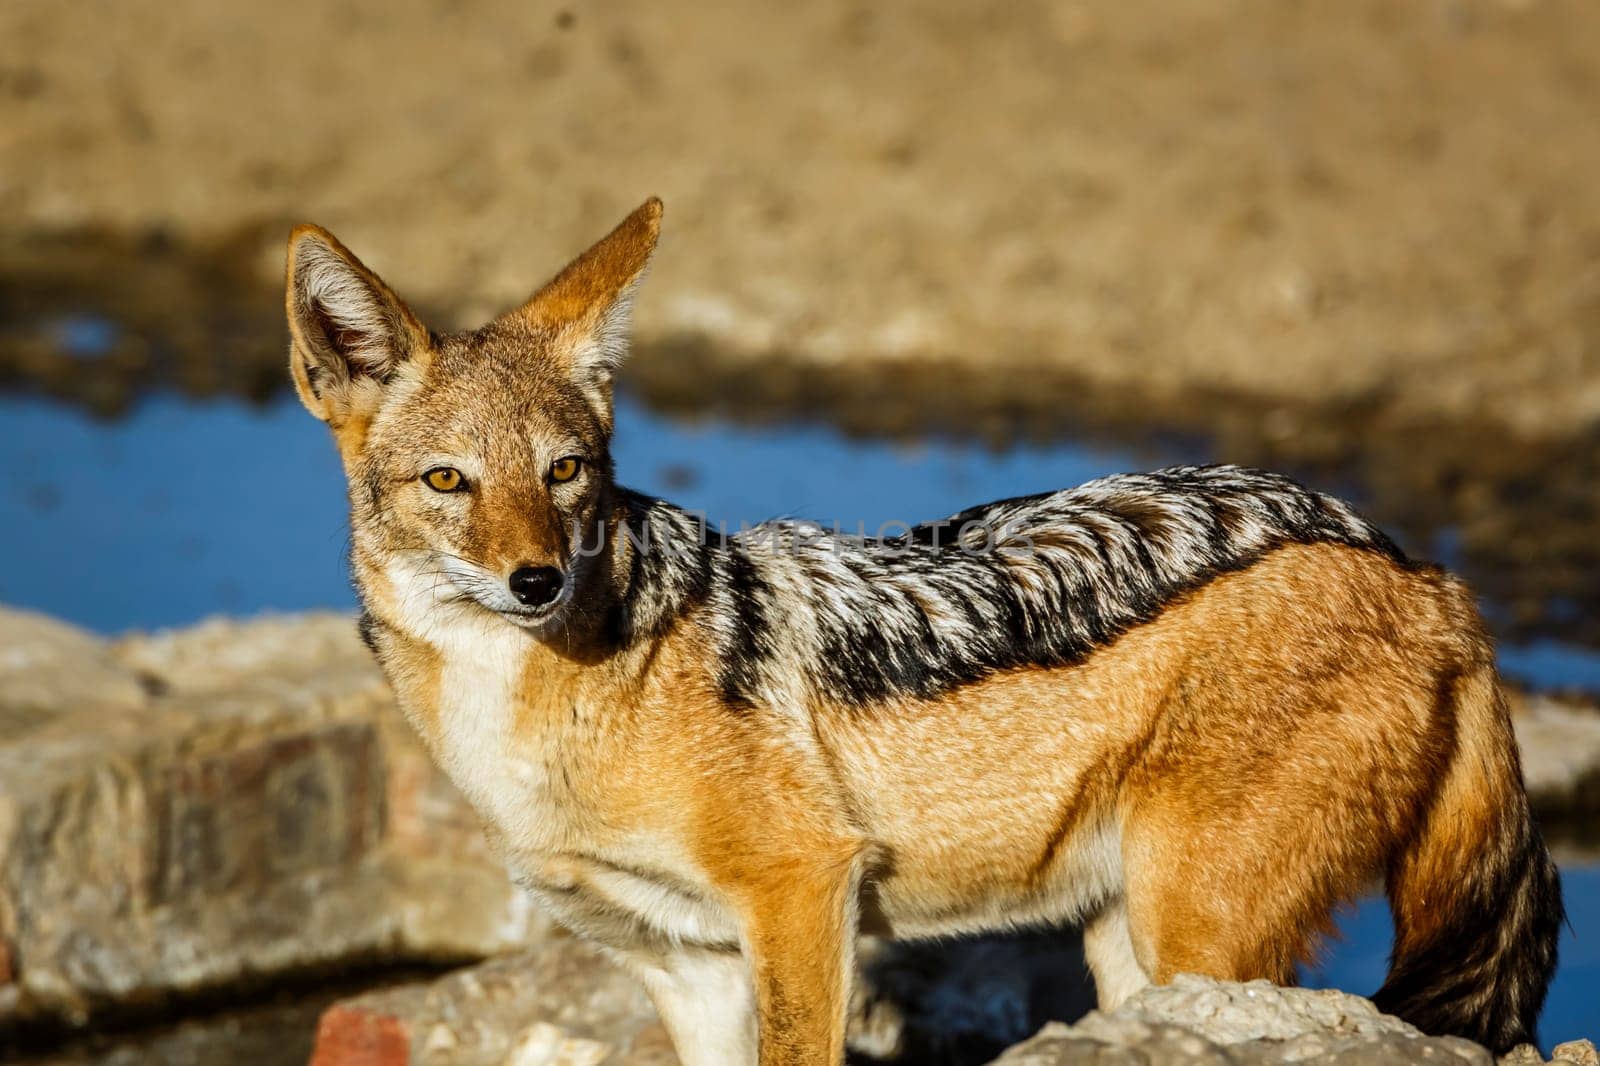 Black backed jackal in Kgalagadi transfrontier park, South Africa by PACOCOMO